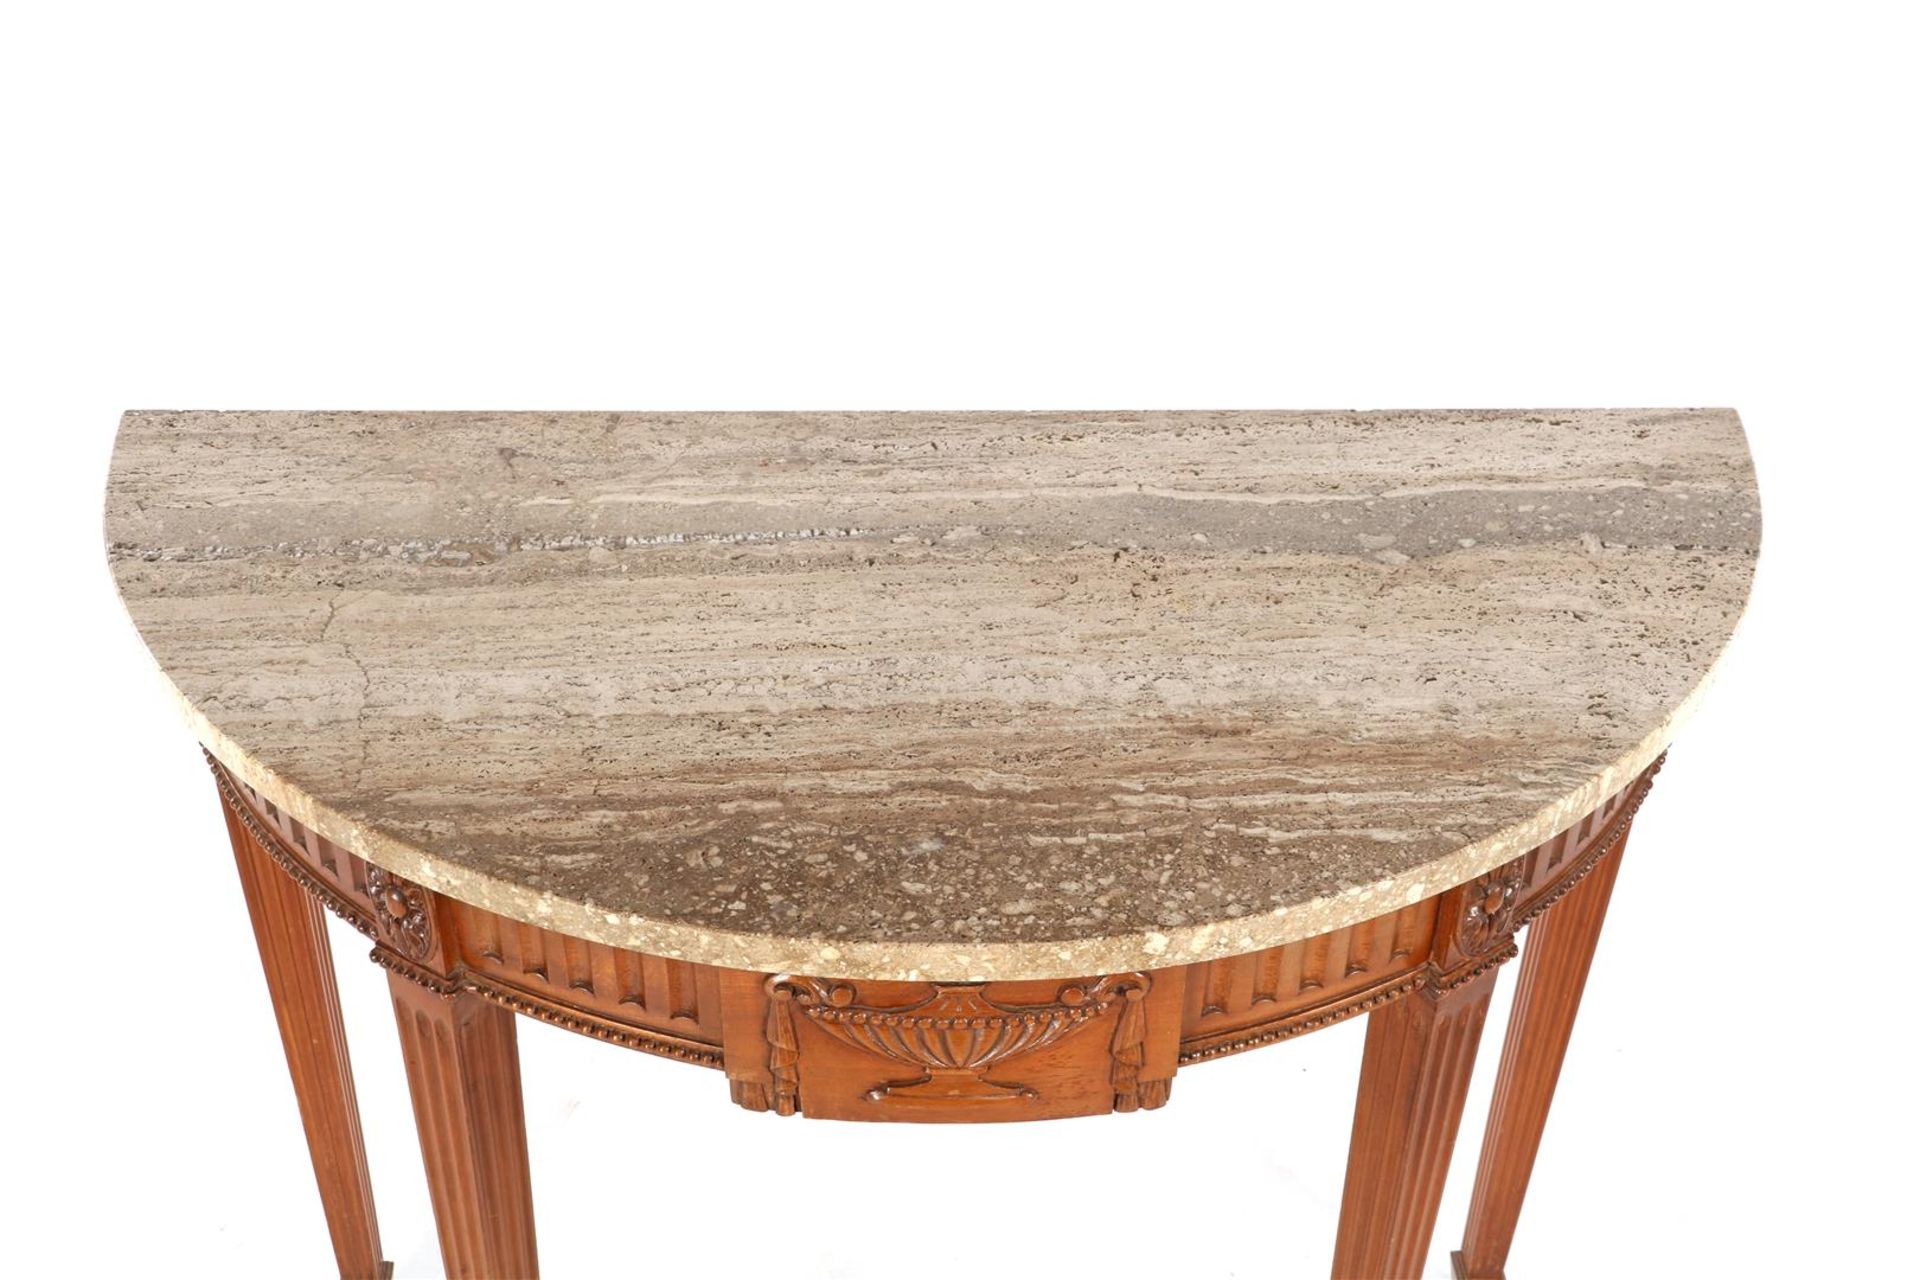 Walnut demi lune table - Image 2 of 2